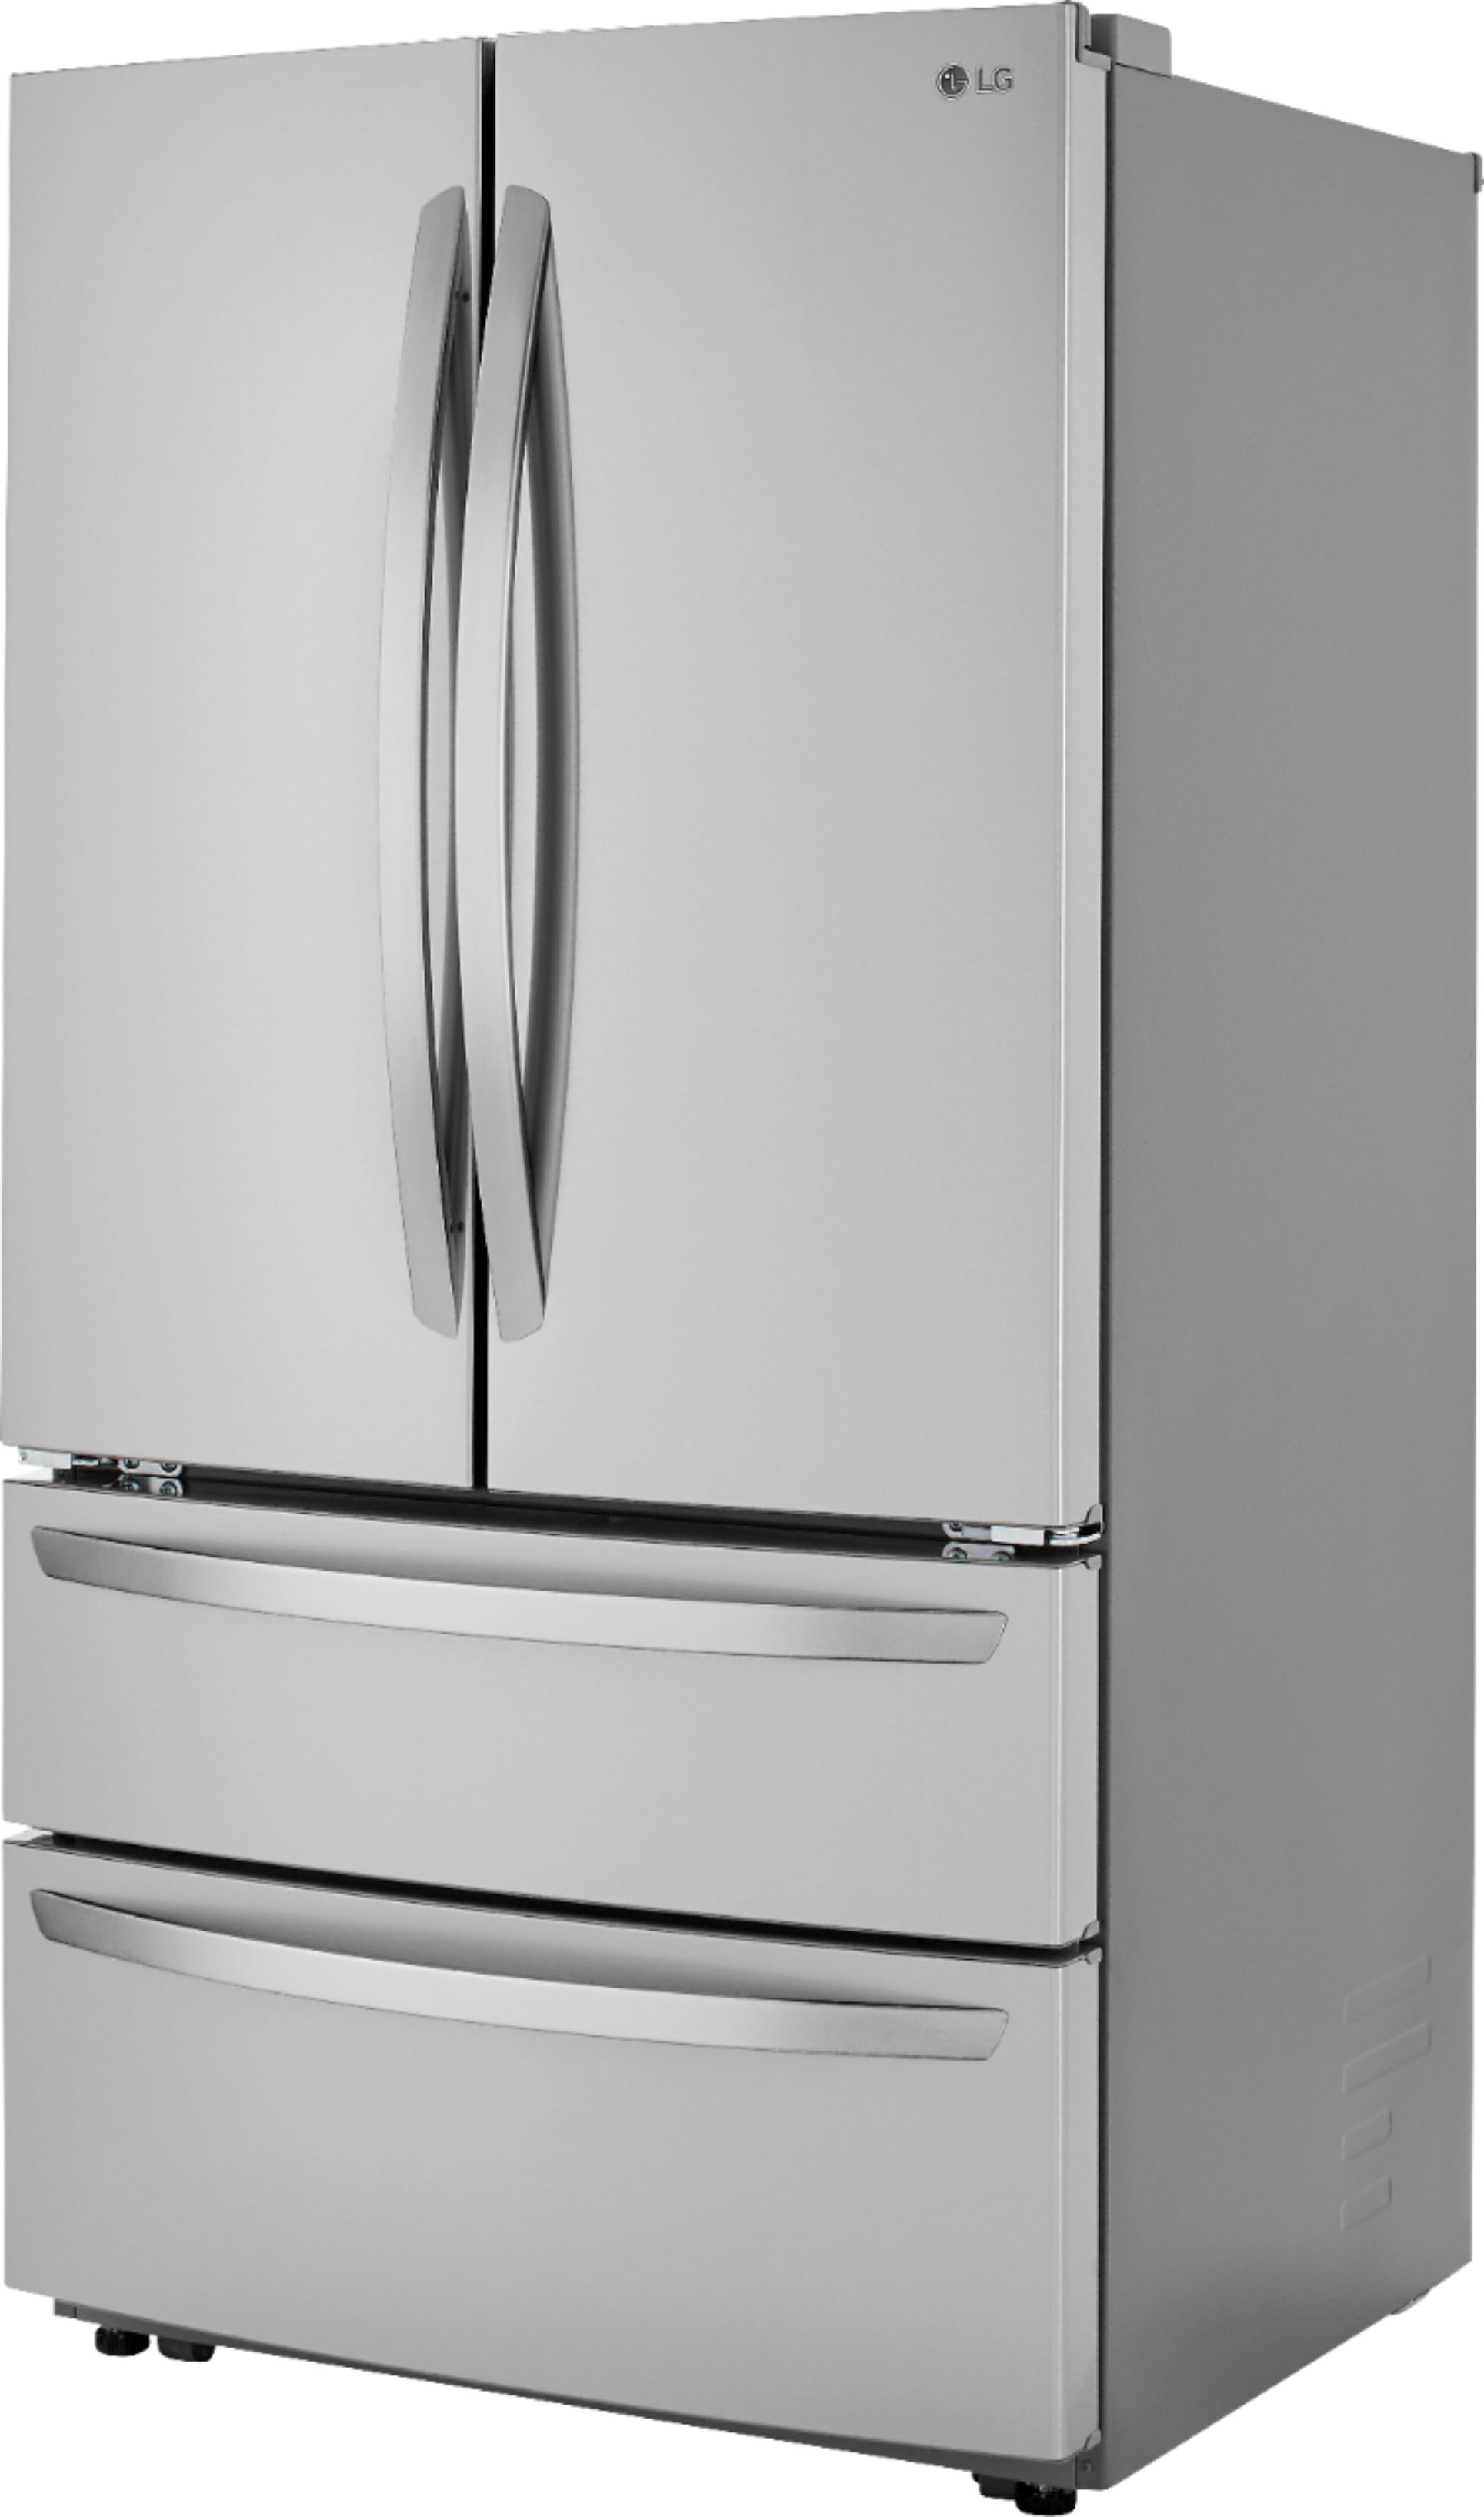 Lg Electronics 33 In W 25 Cu Ft French Door Refrigerator With Filtered Ice In Printproof Stainless Steel Lrfcs2503s The Home Depot